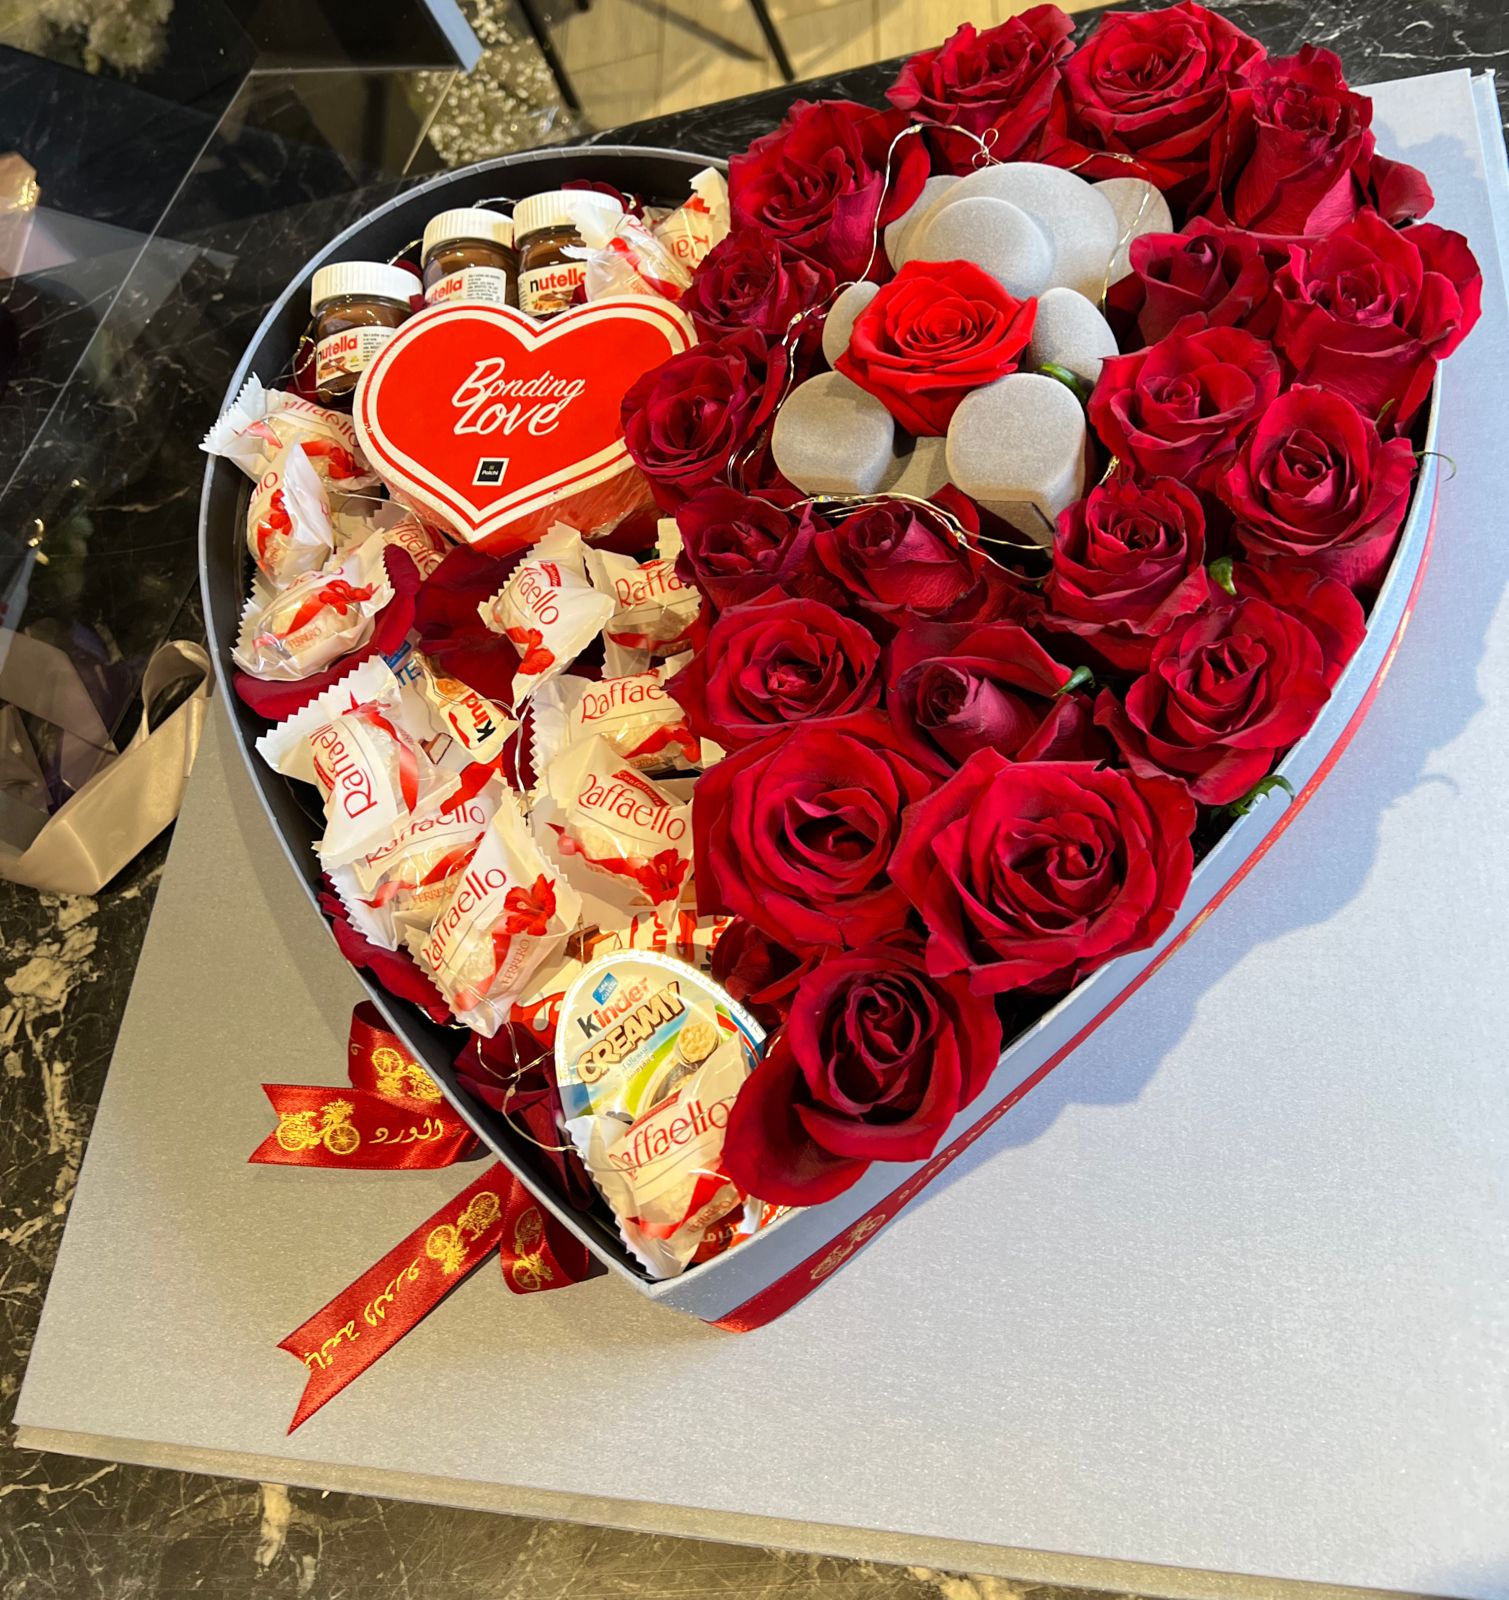 Big Heart Chocolate & Flowers with Forever Rose - Bae3at Elward flower shop 